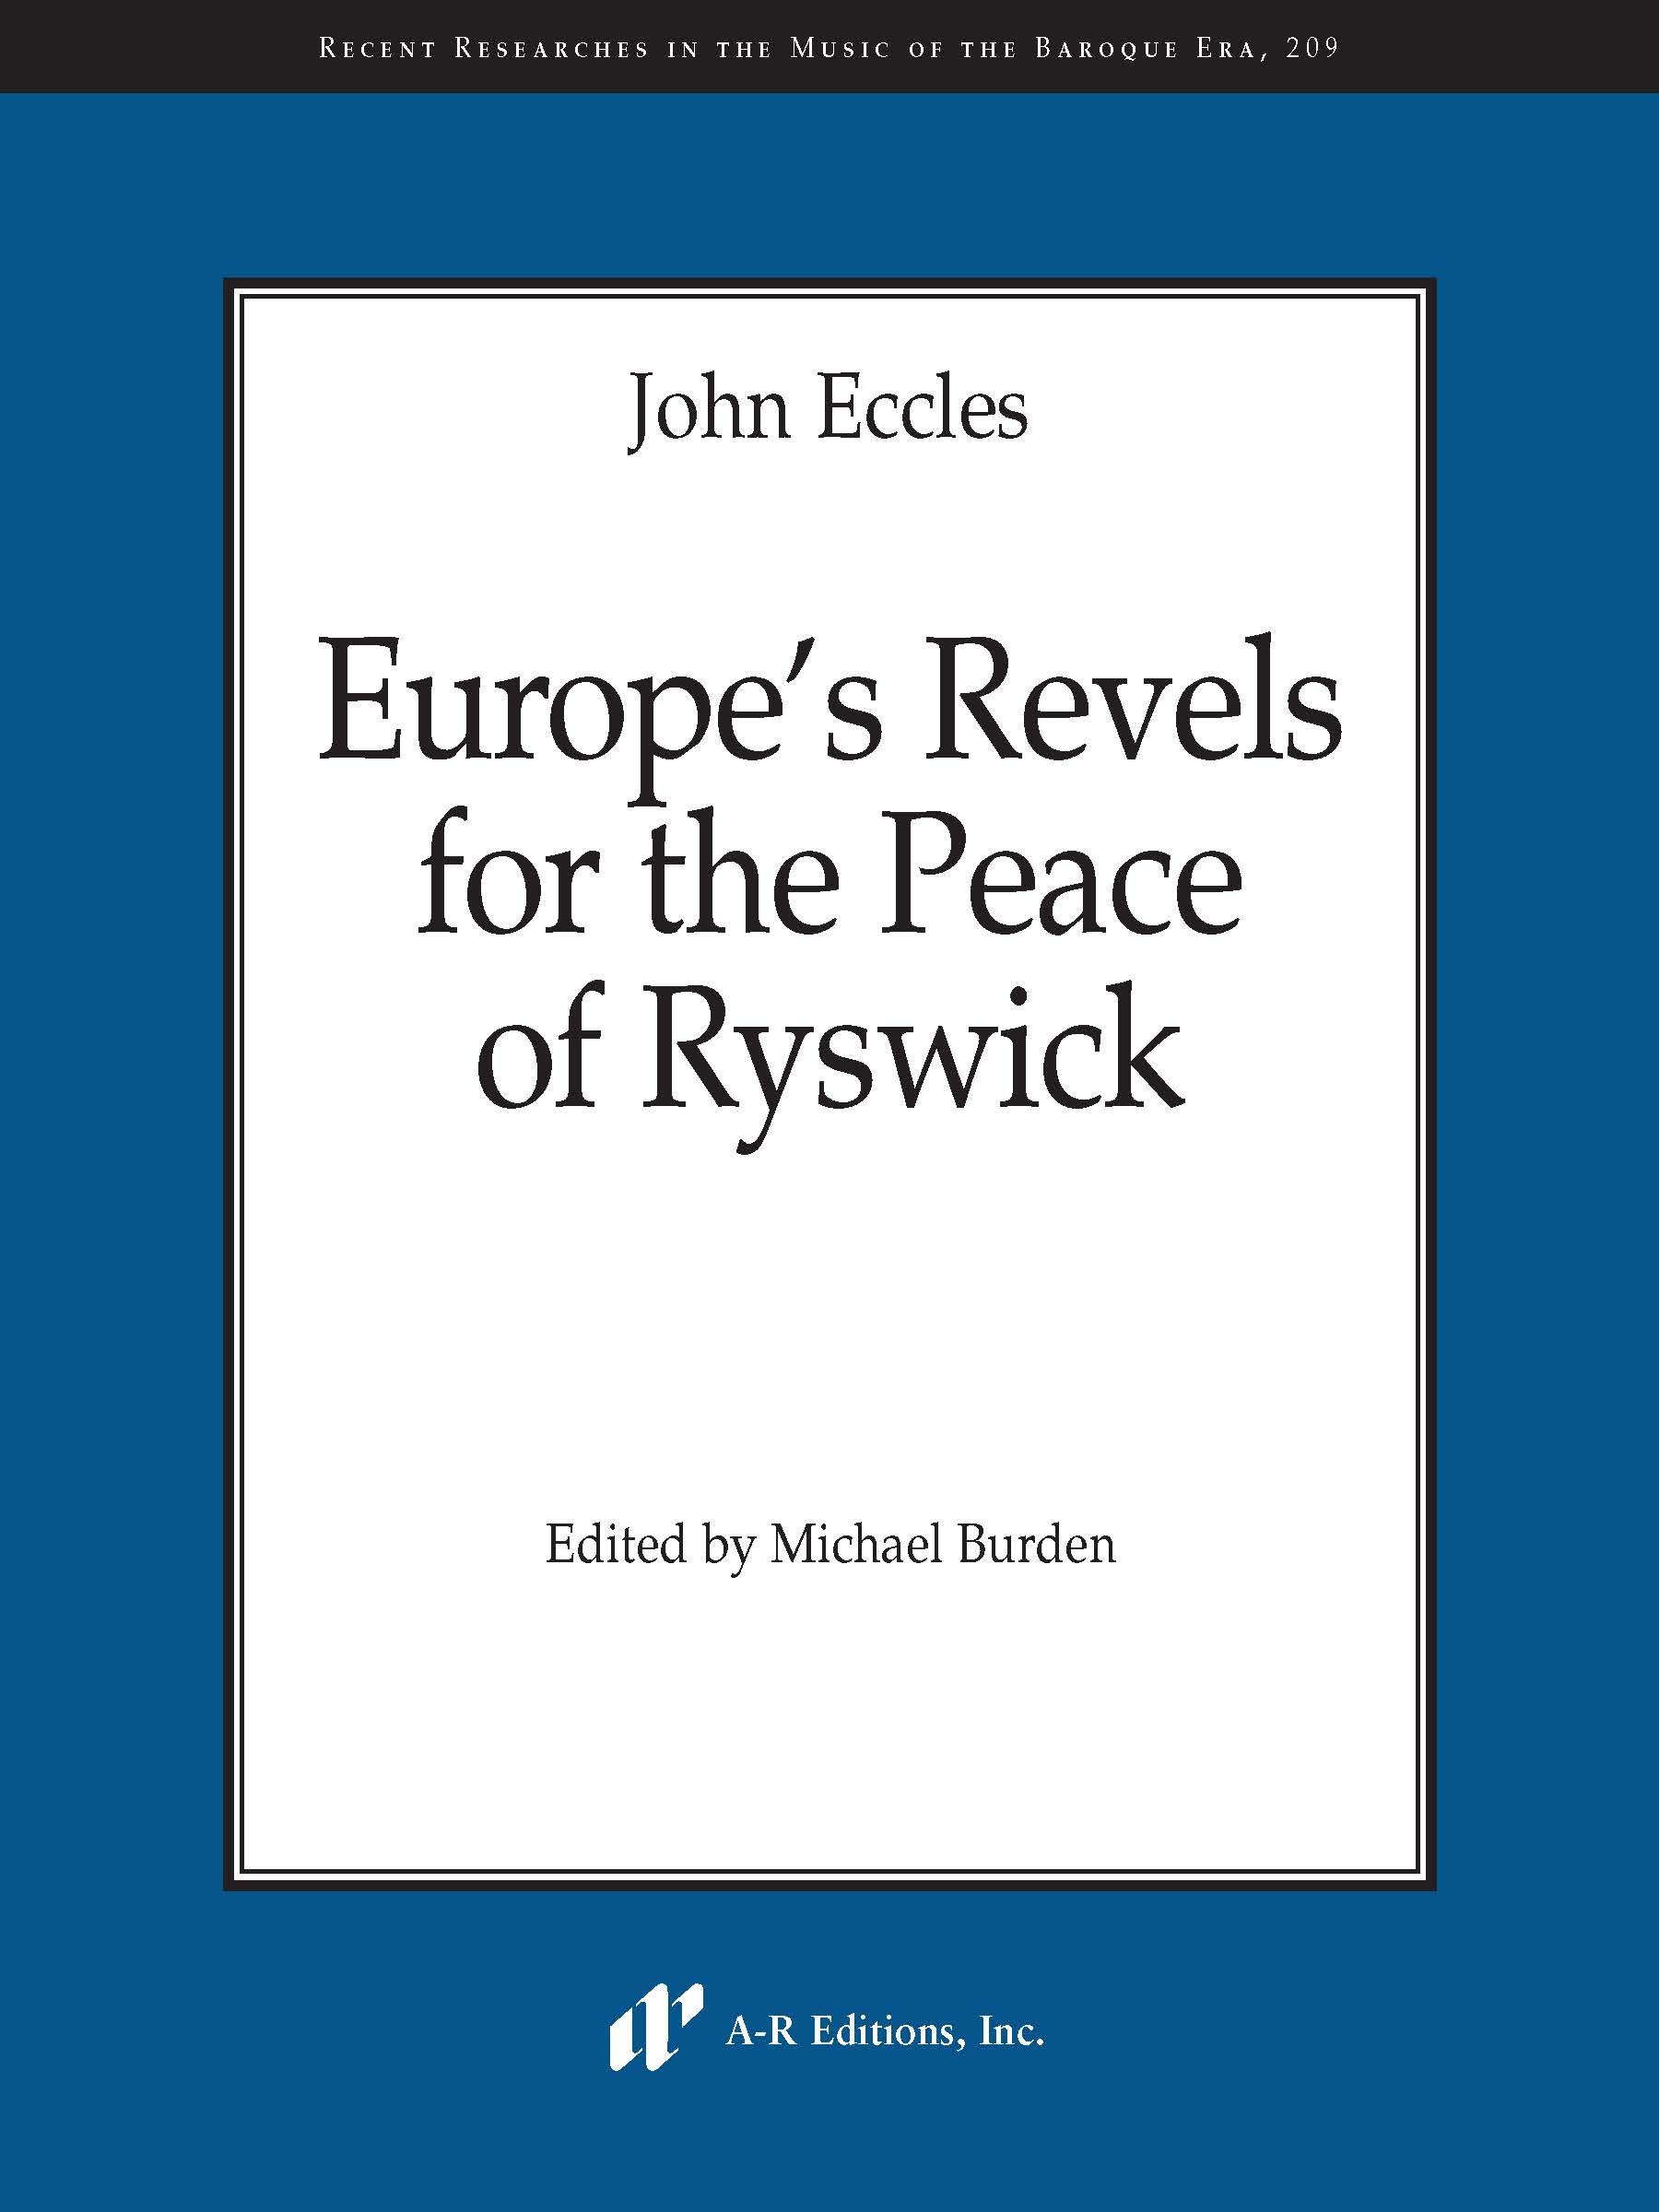 Cover of A-R Editions John Eccles Peace of Ryswick